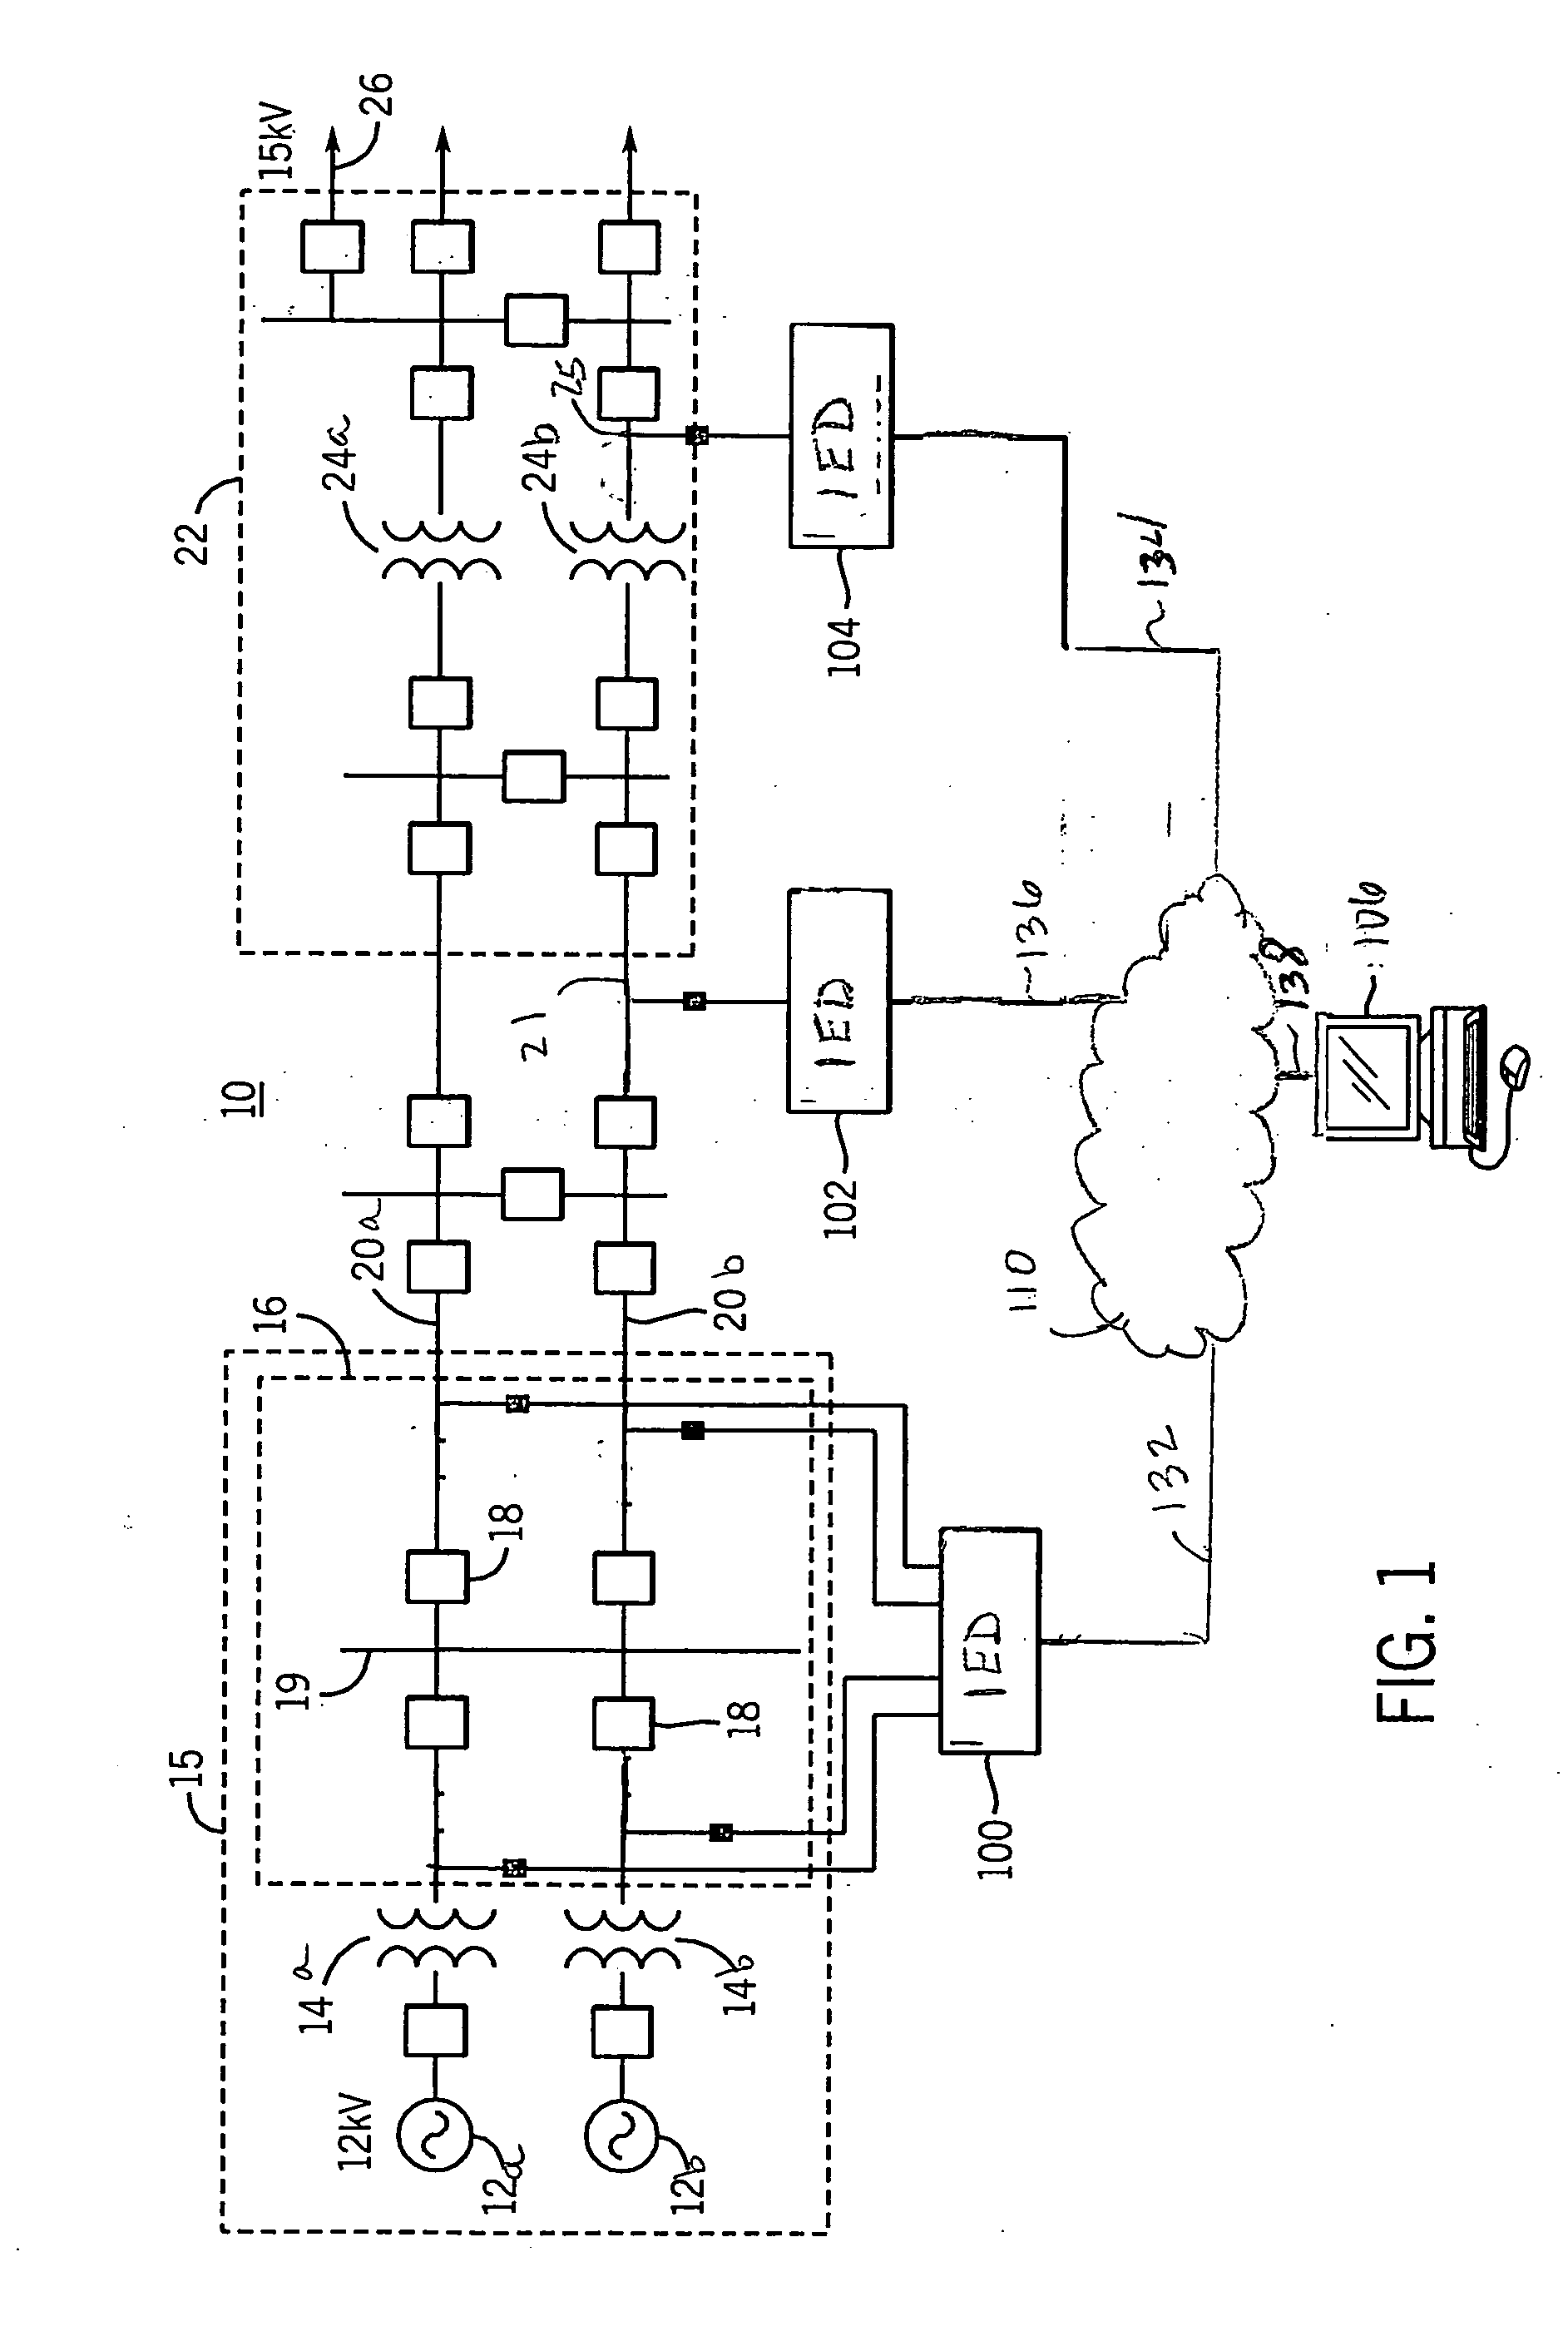 System and method for detecting power system conditions